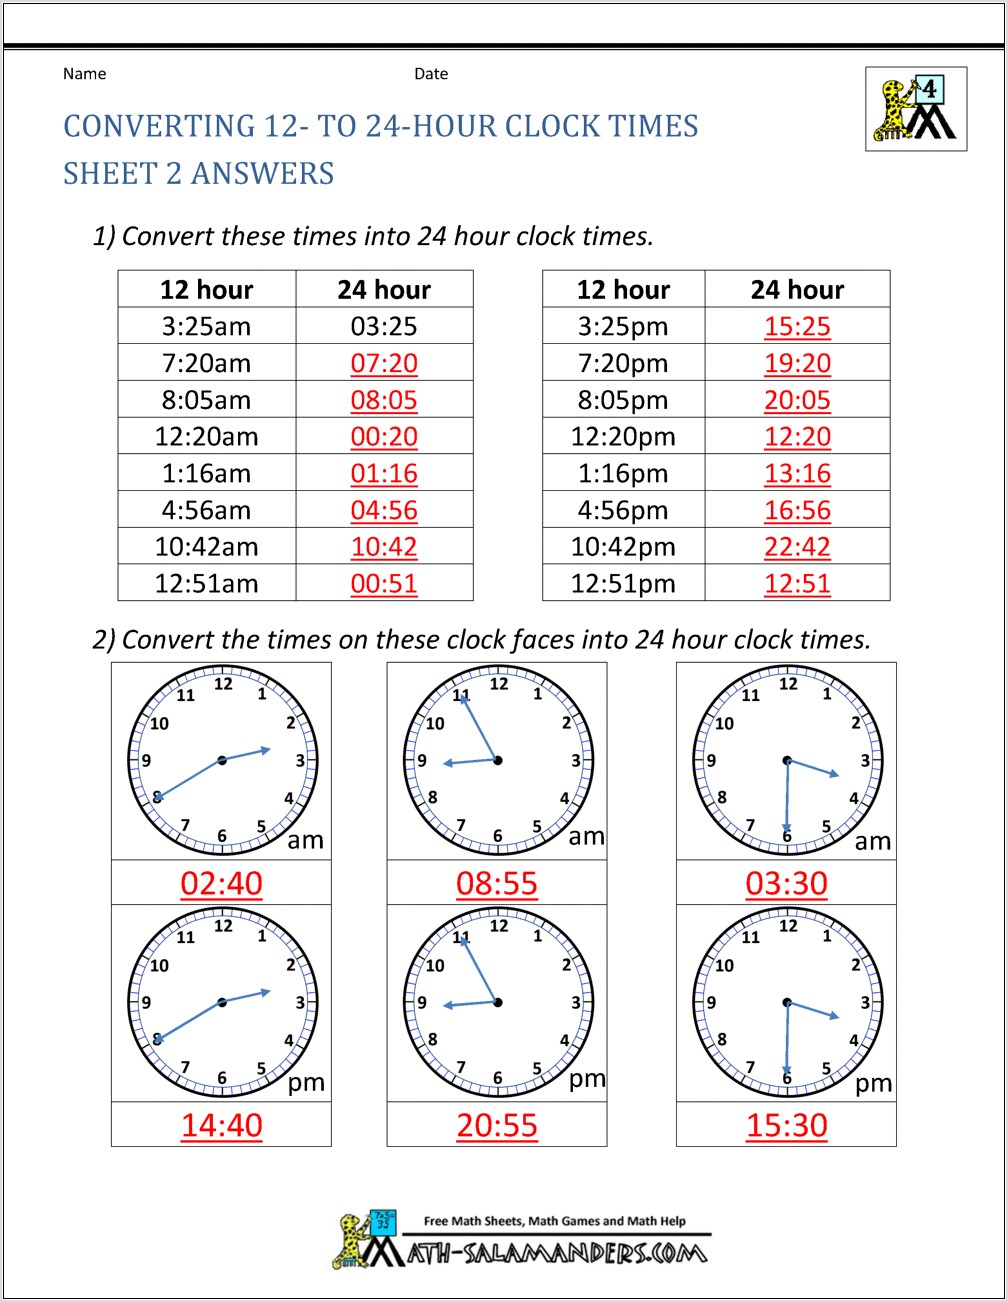 Worksheet About Time Conversion